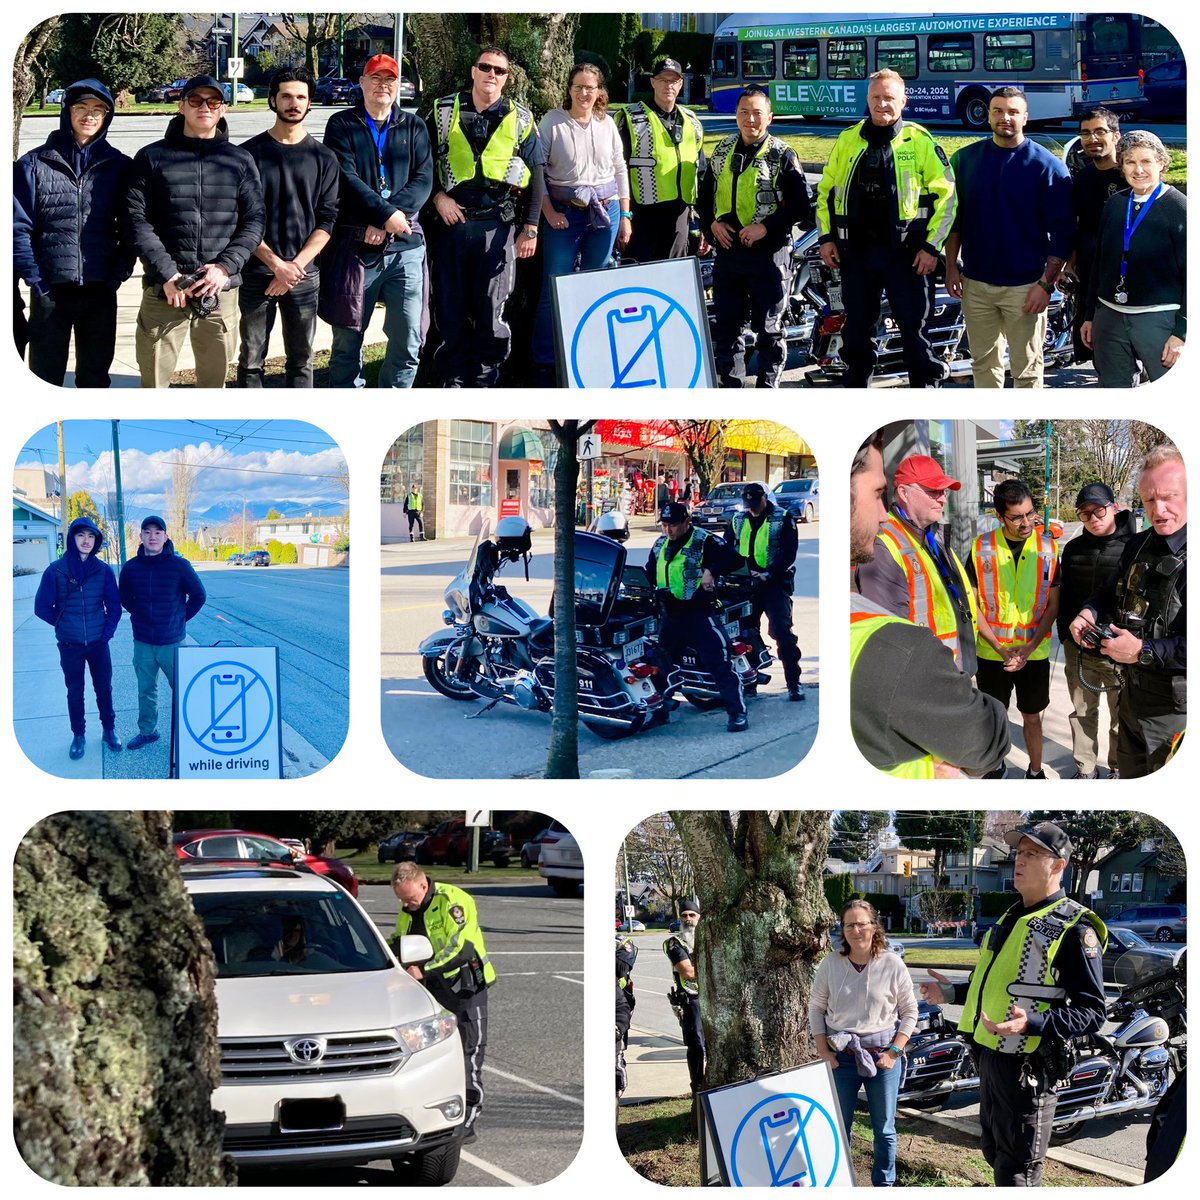 Great to see @VancouverPD Volunteers @KitsFairCPC @KOMCPC @RoadSafety_Paul team up with @VPDTrafficUnit members for Distracted Driving enforcement @CityofVancouver #LeaveYourPhoneAlone while 🚙🚗🚛@icbc #EyesFwdBC